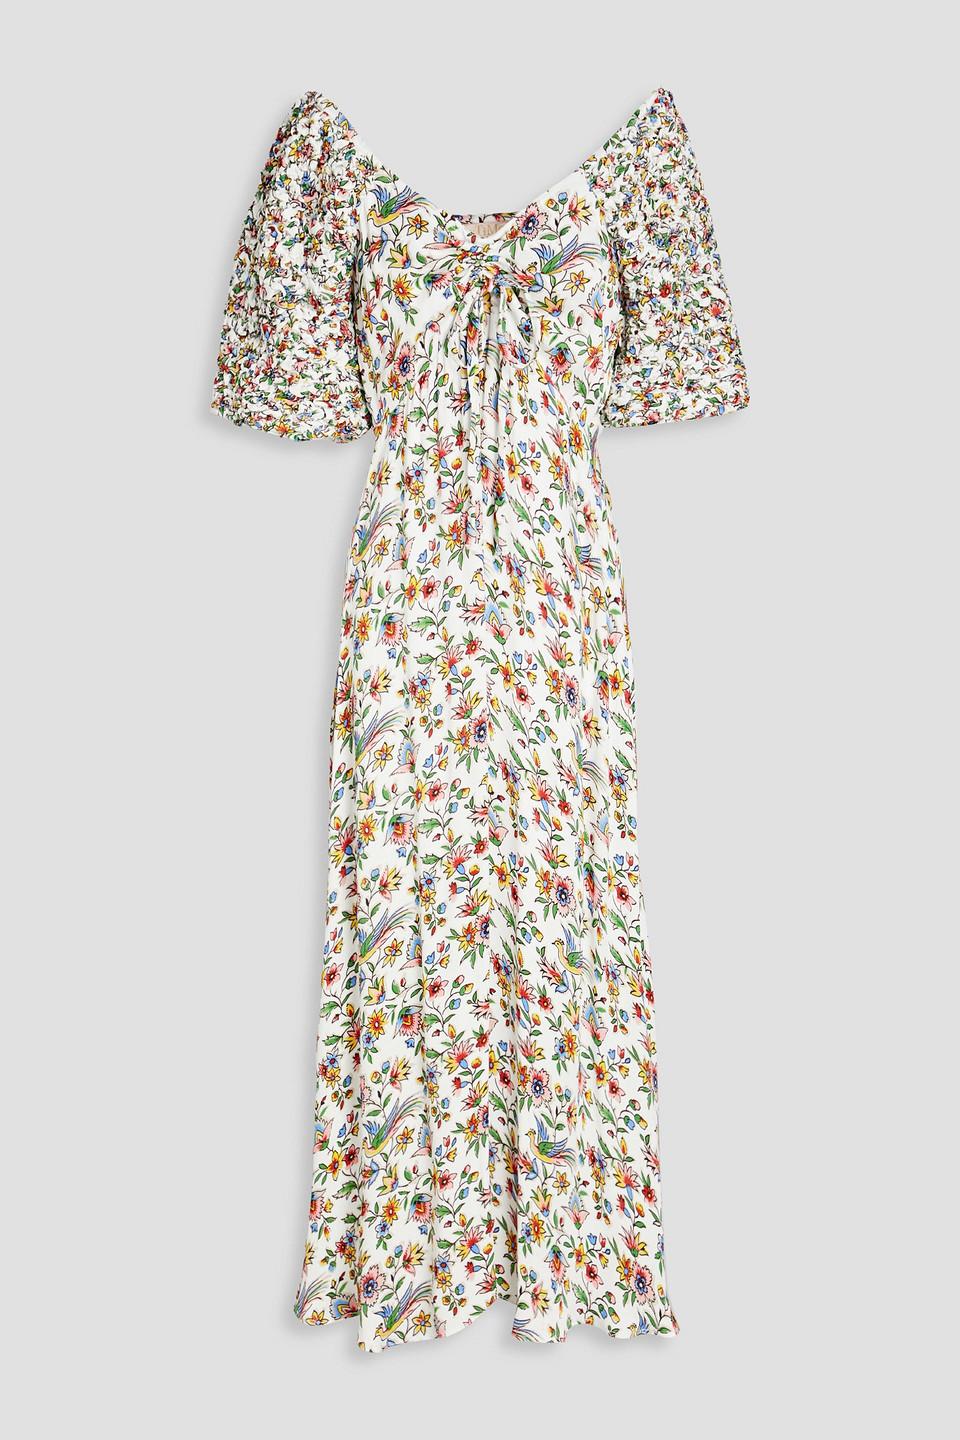 byTiMo Off-the-shoulder Printed Satin-crepe Midi Dress in White | Lyst